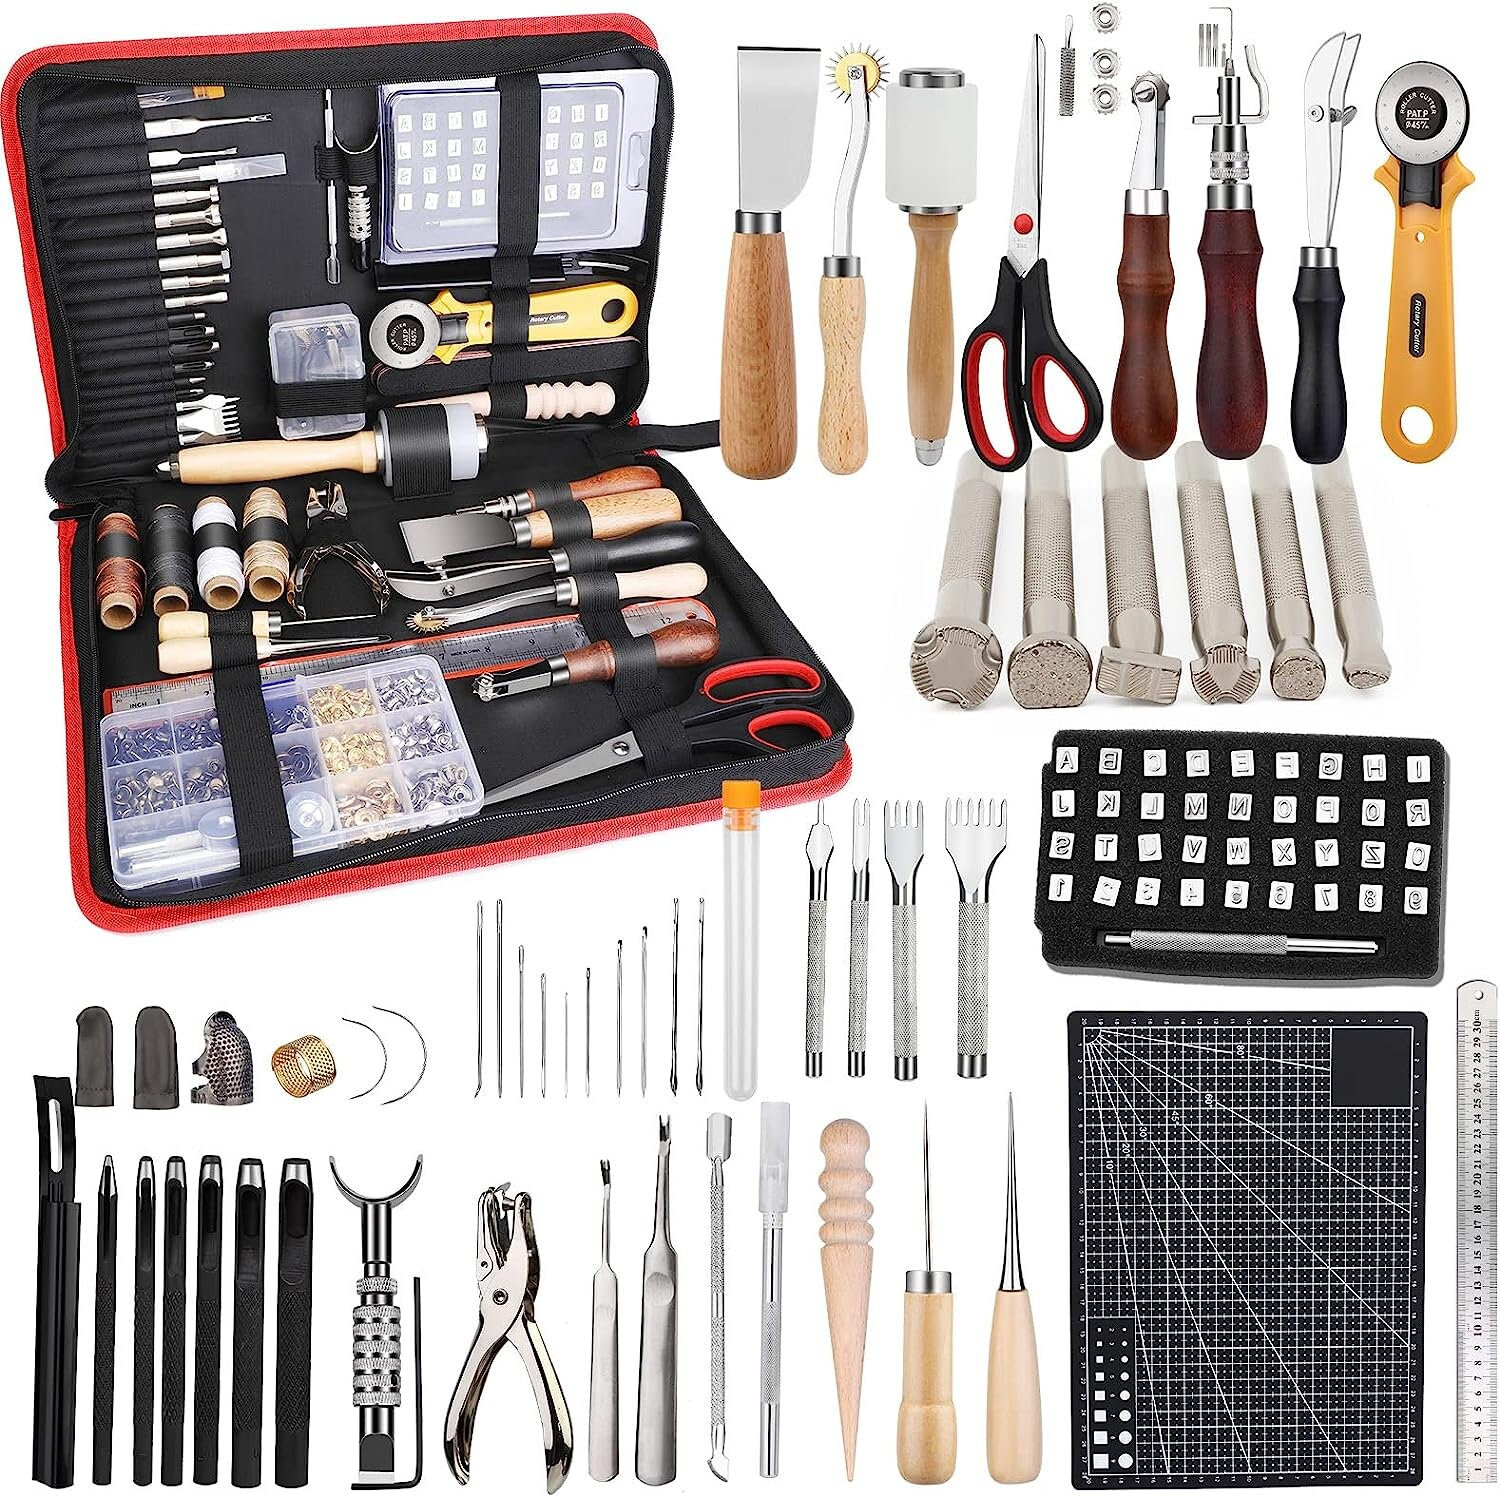 18pcs Leather Craft Kit Set Tool Leather Working Punch Stitching Sewing  Groover Sanding Cutting Pricking Iron DIY suitable for Beginners 